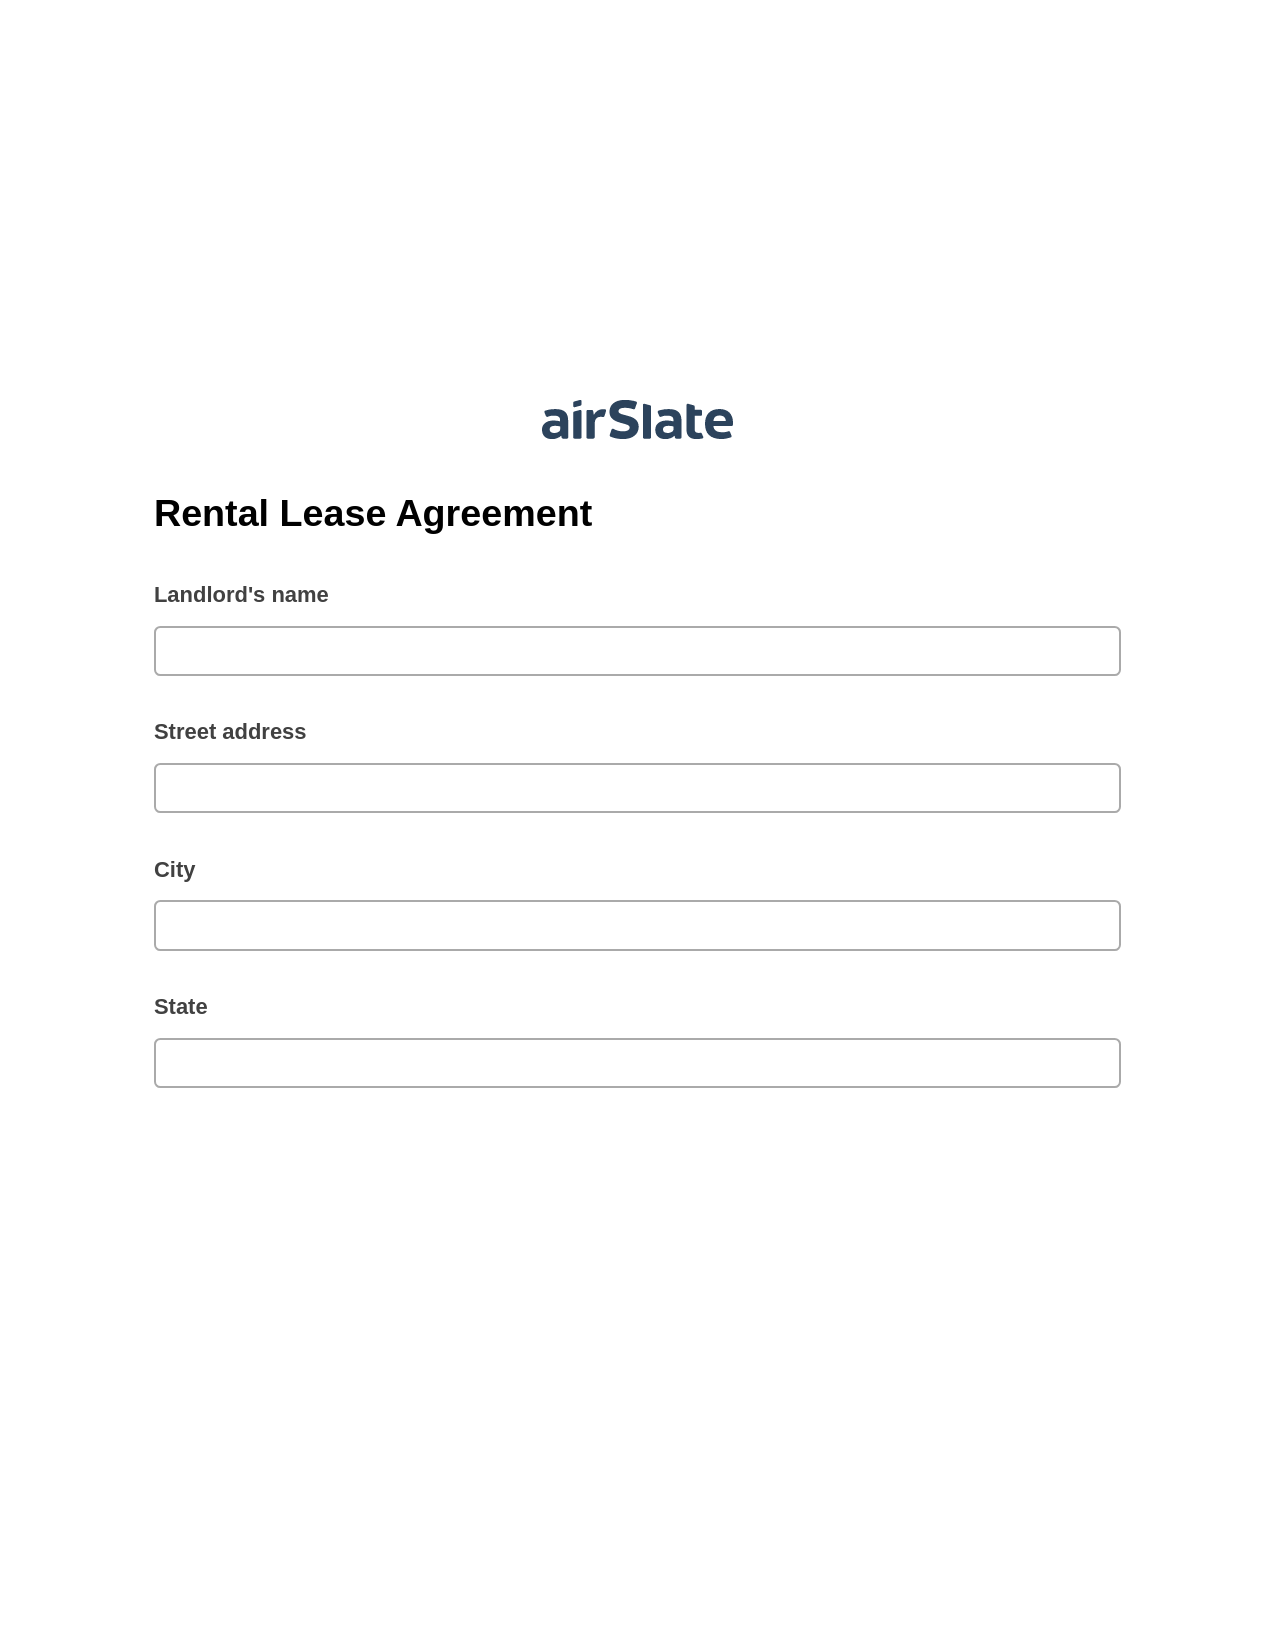 Rental Lease Agreement Pre-fill Slate from MS Dynamics 365 Records Bot, SendGrid send Campaign bot, Post-finish Document Bot